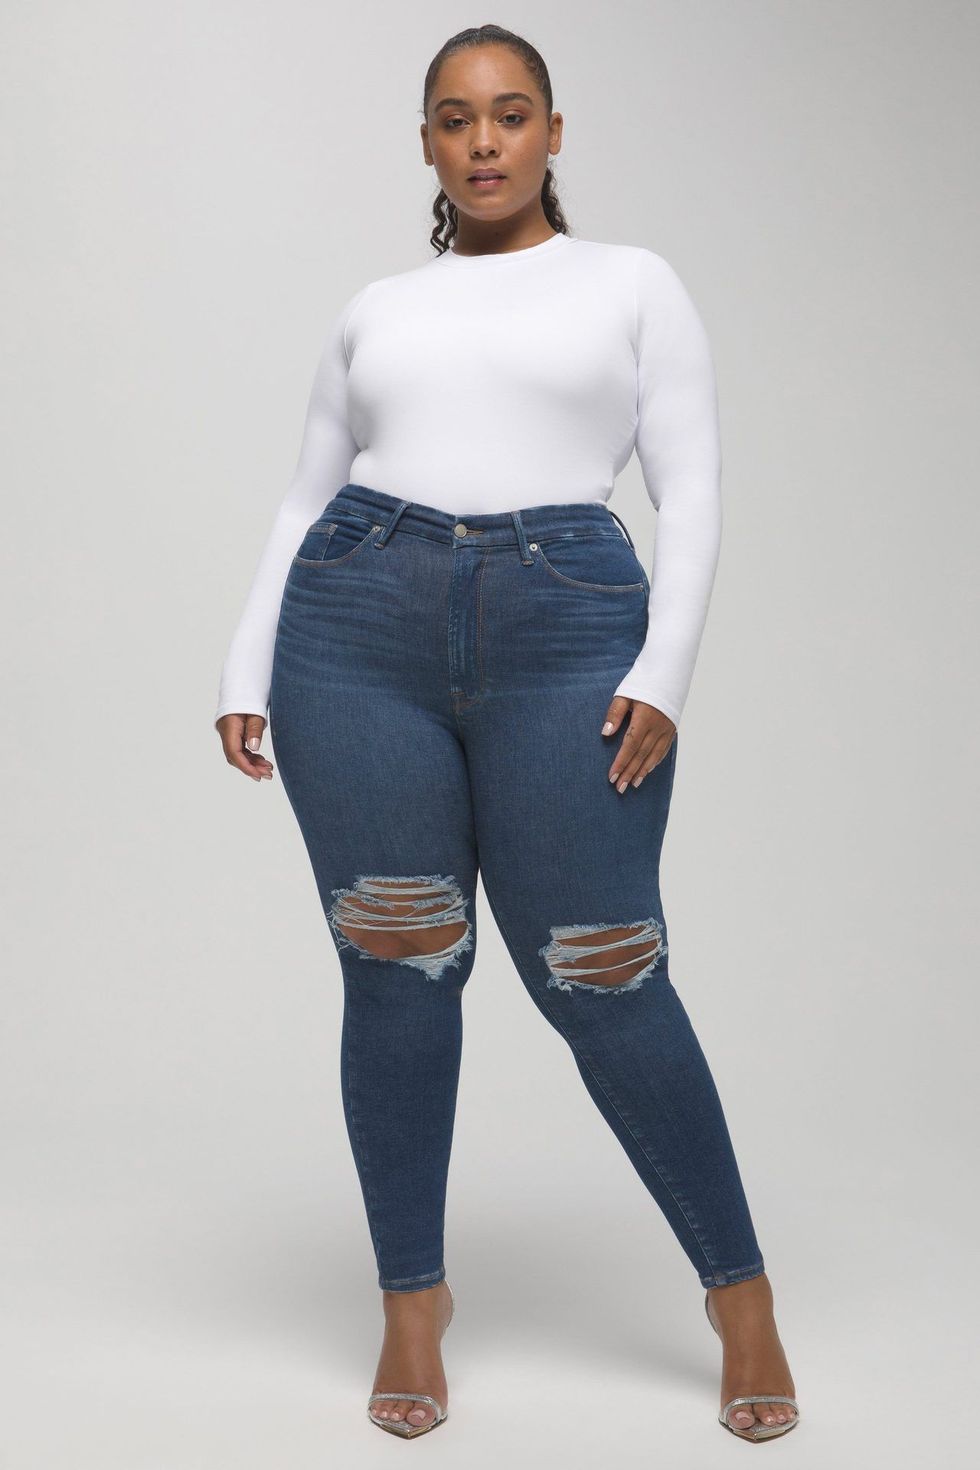 Good American's New Always Fits Jeans Collection Review